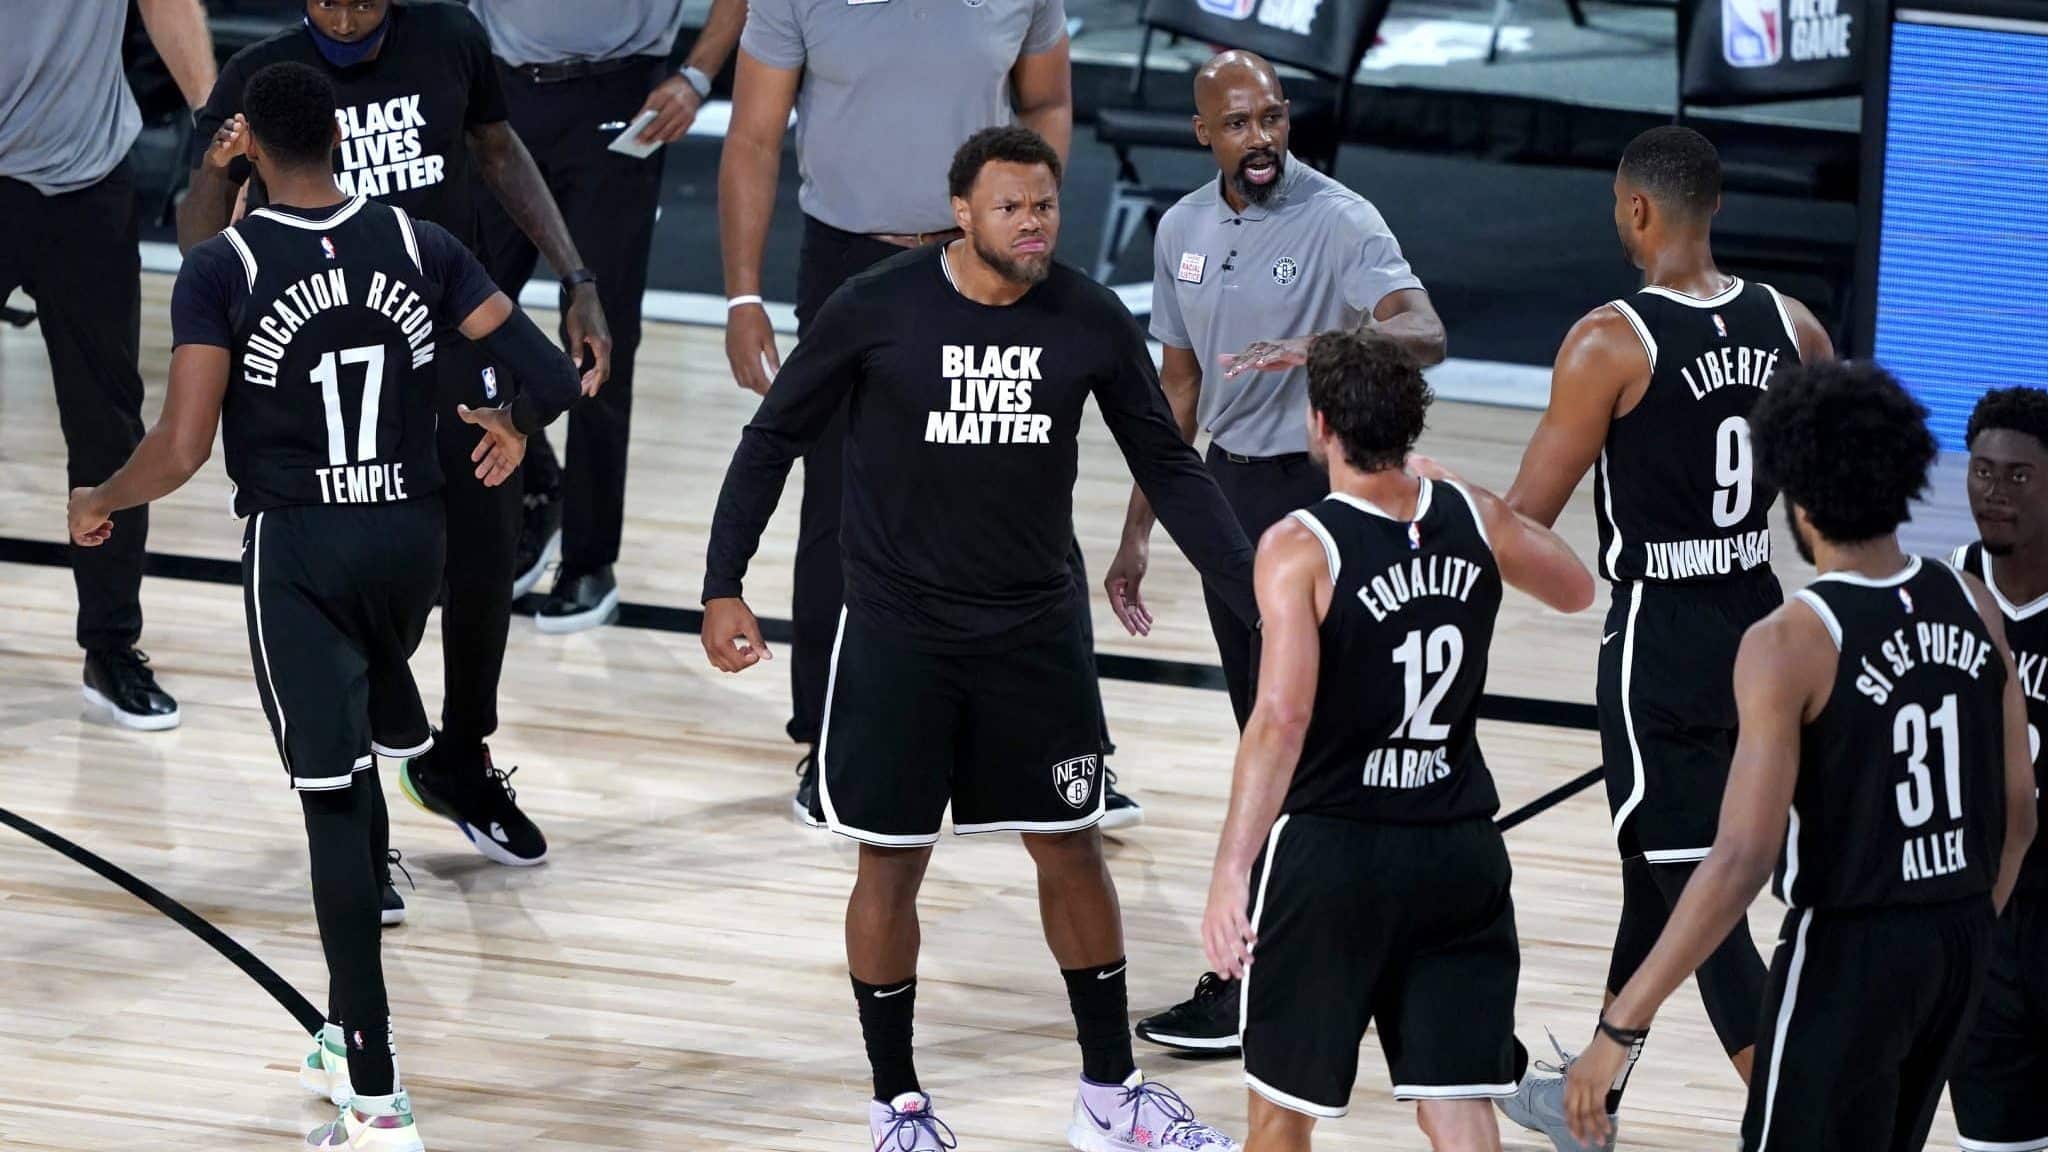 LAKE BUENA VISTA, FLORIDA - AUGUST 13: Justin Anderson of the Brooklyn Nets reacts as teammates walk off the floor for a timeout in the second half against the Portland Trail Blazers at AdventHealth Arena at ESPN Wide World Of Sports Complex on August 13, 2020 in Lake Buena Vista, Florida. NOTE TO USER: User expressly acknowledges and agrees that, by downloading and or using this photograph, User is consenting to the terms and conditions of the Getty Images License Agreement.